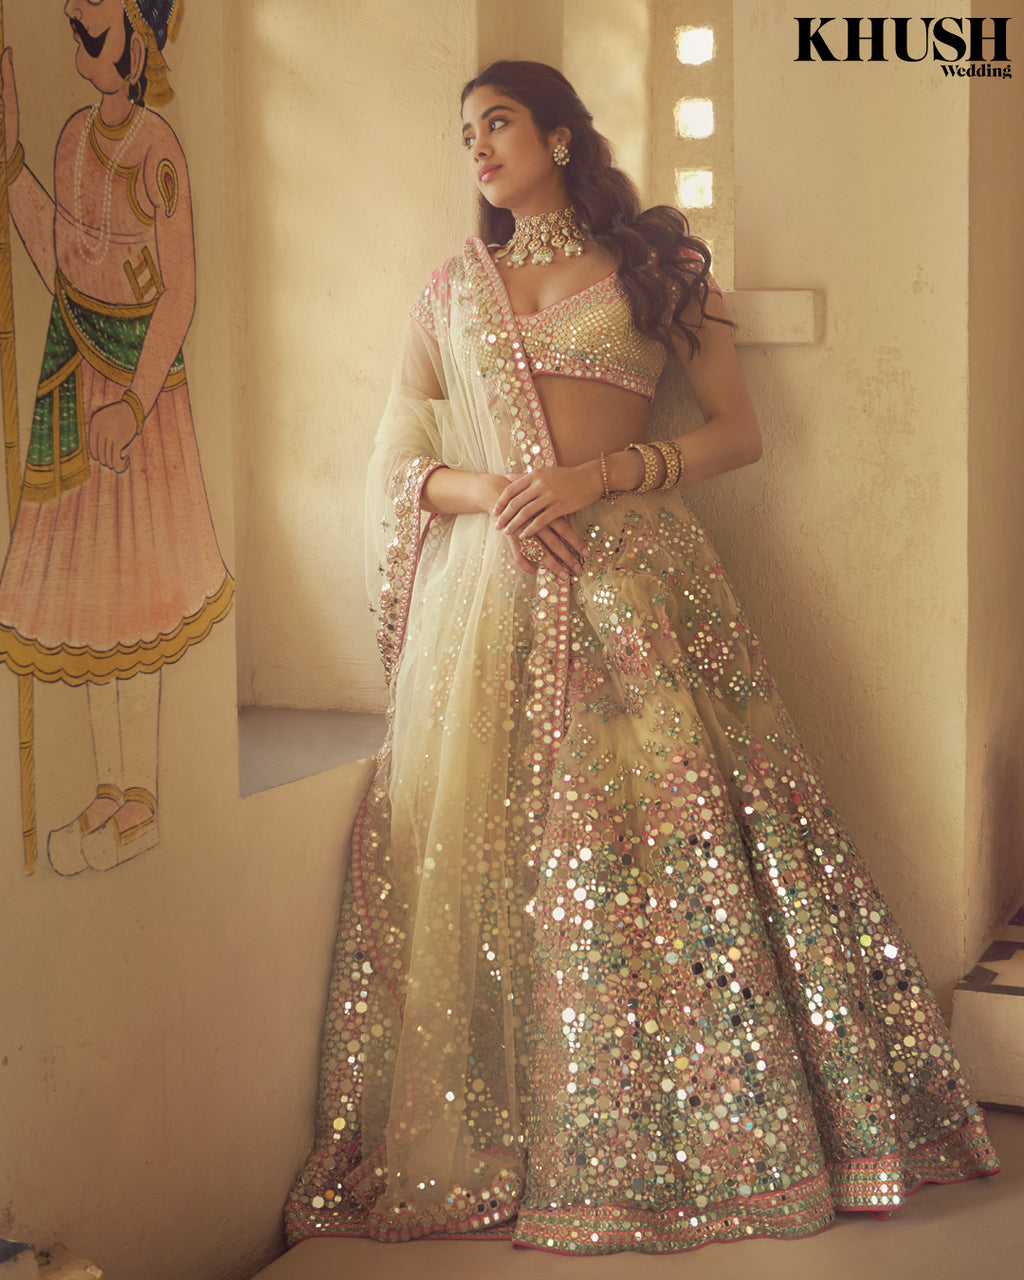 These Indian Designers Ruled 2019 & You Must Save Their Designs Now! |  WeddingBazaar